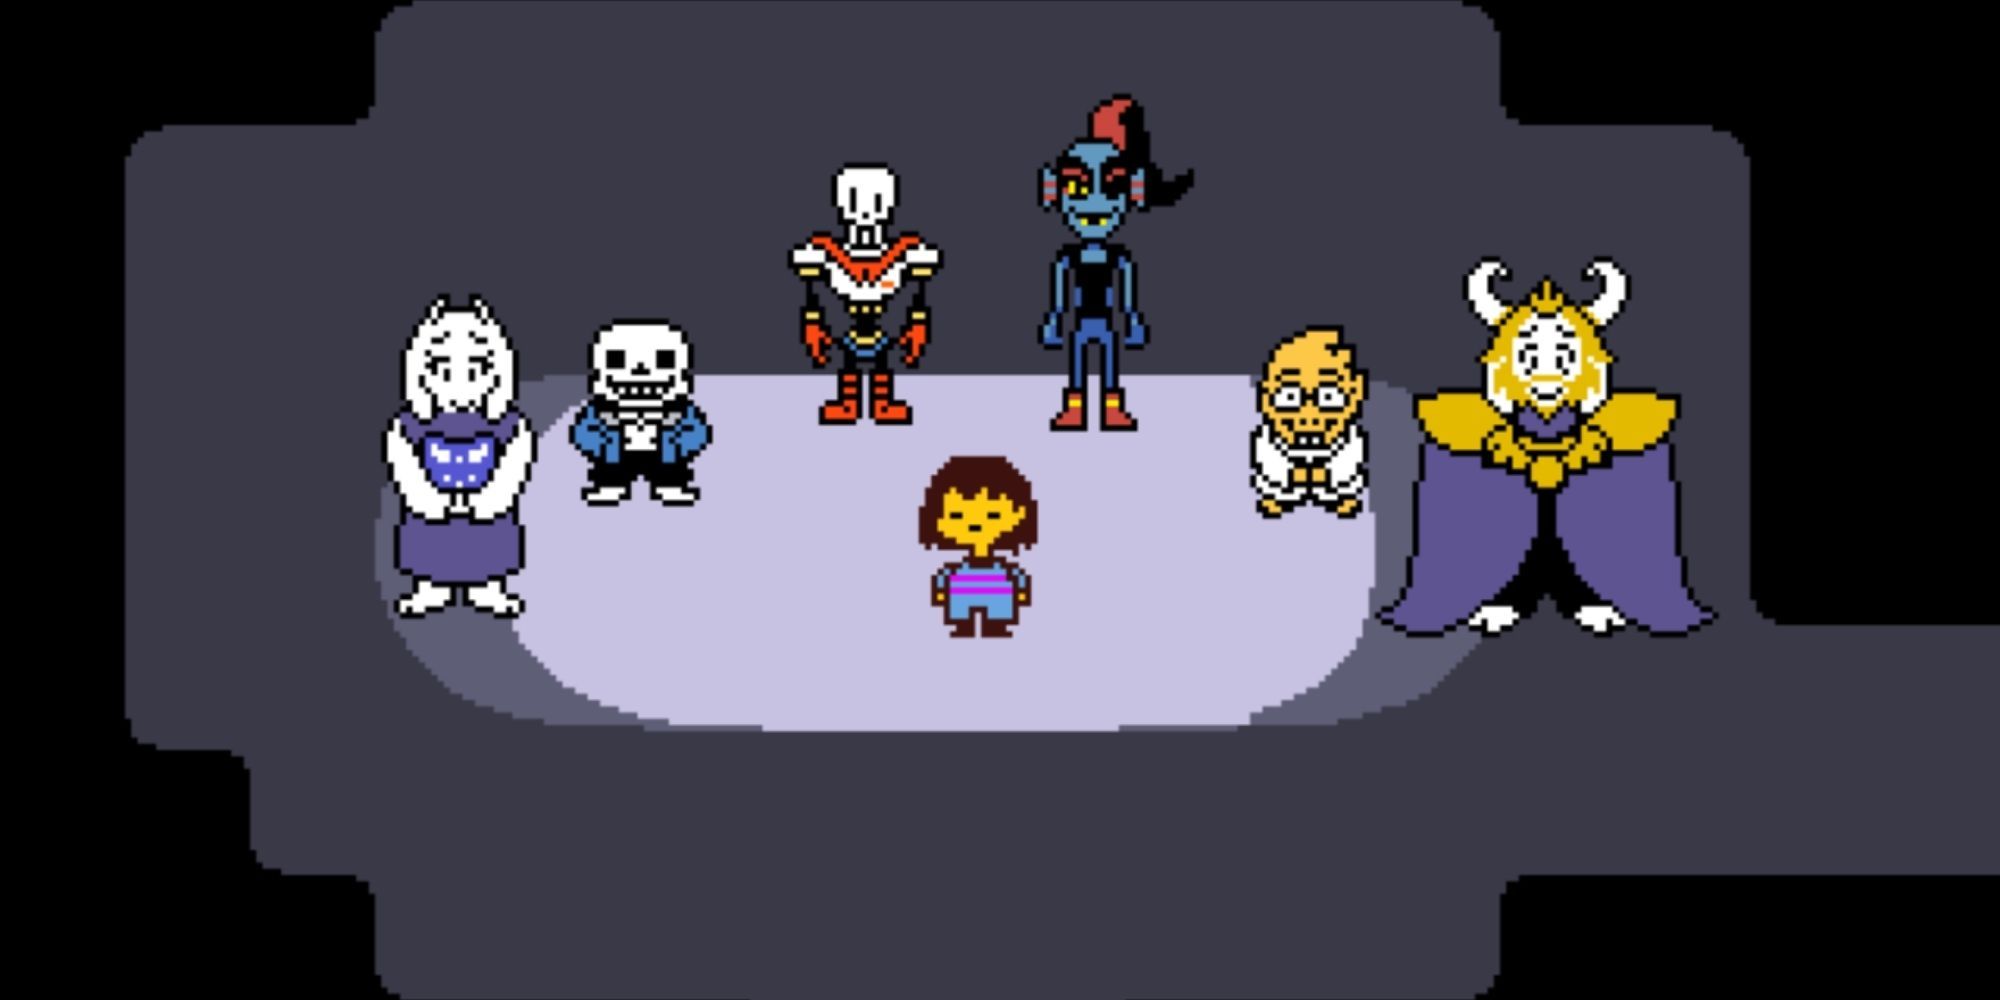 Frisk, Toriel, Sans, Papyrus, Undyne, Alphys, And Asgore from Undertale Standing Next To Each Other